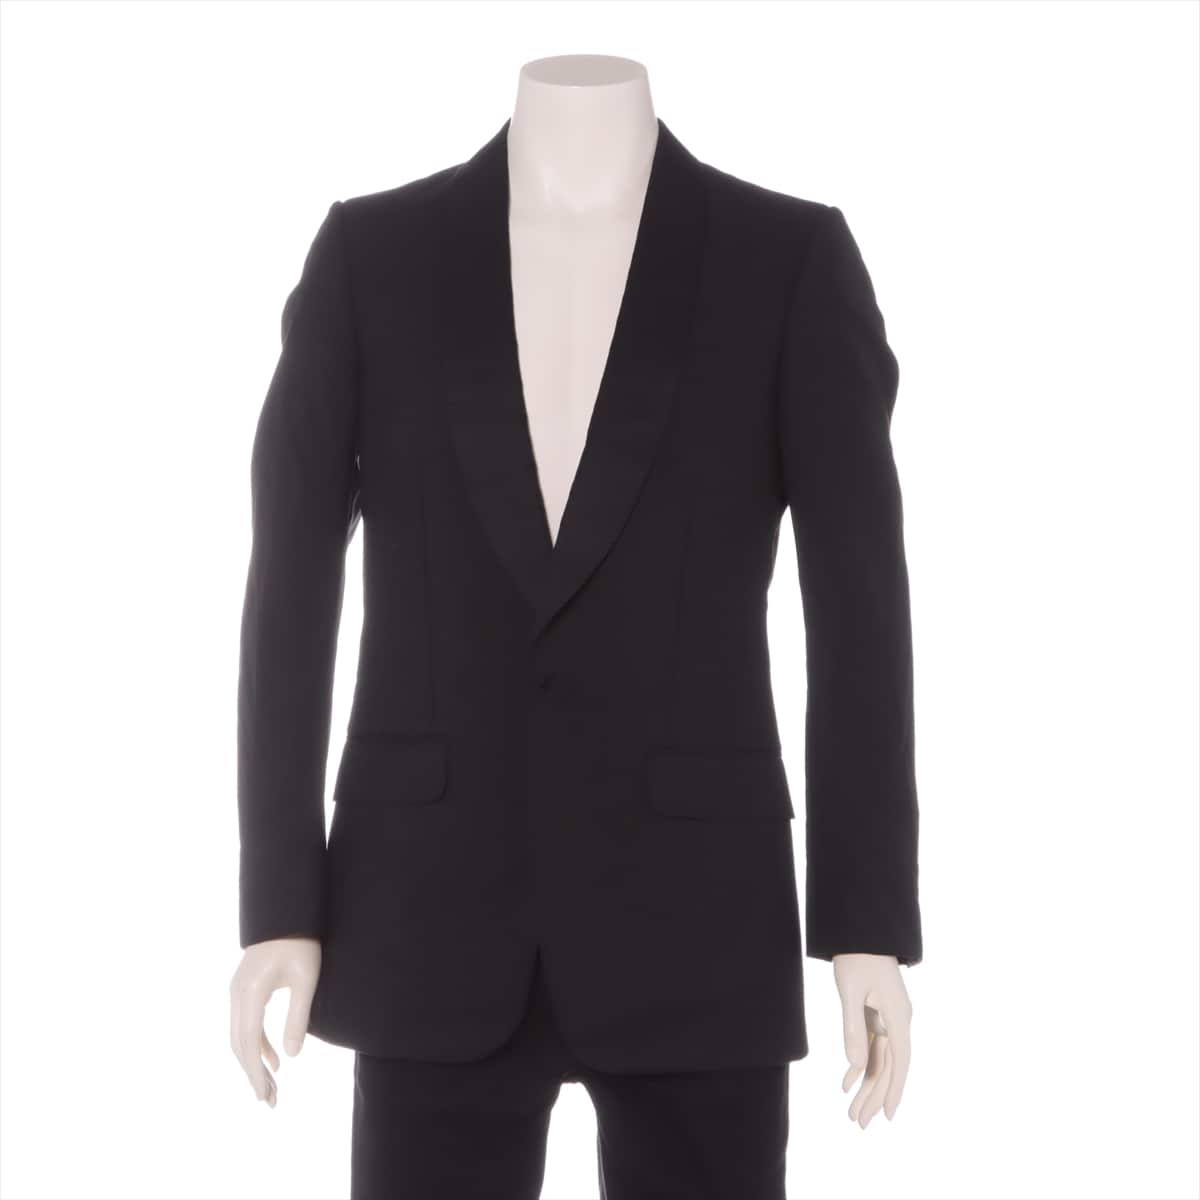 Gucci Wool & Mohair Tailored jacket 7-46R Men's Black  DIY cobra embroidery With name